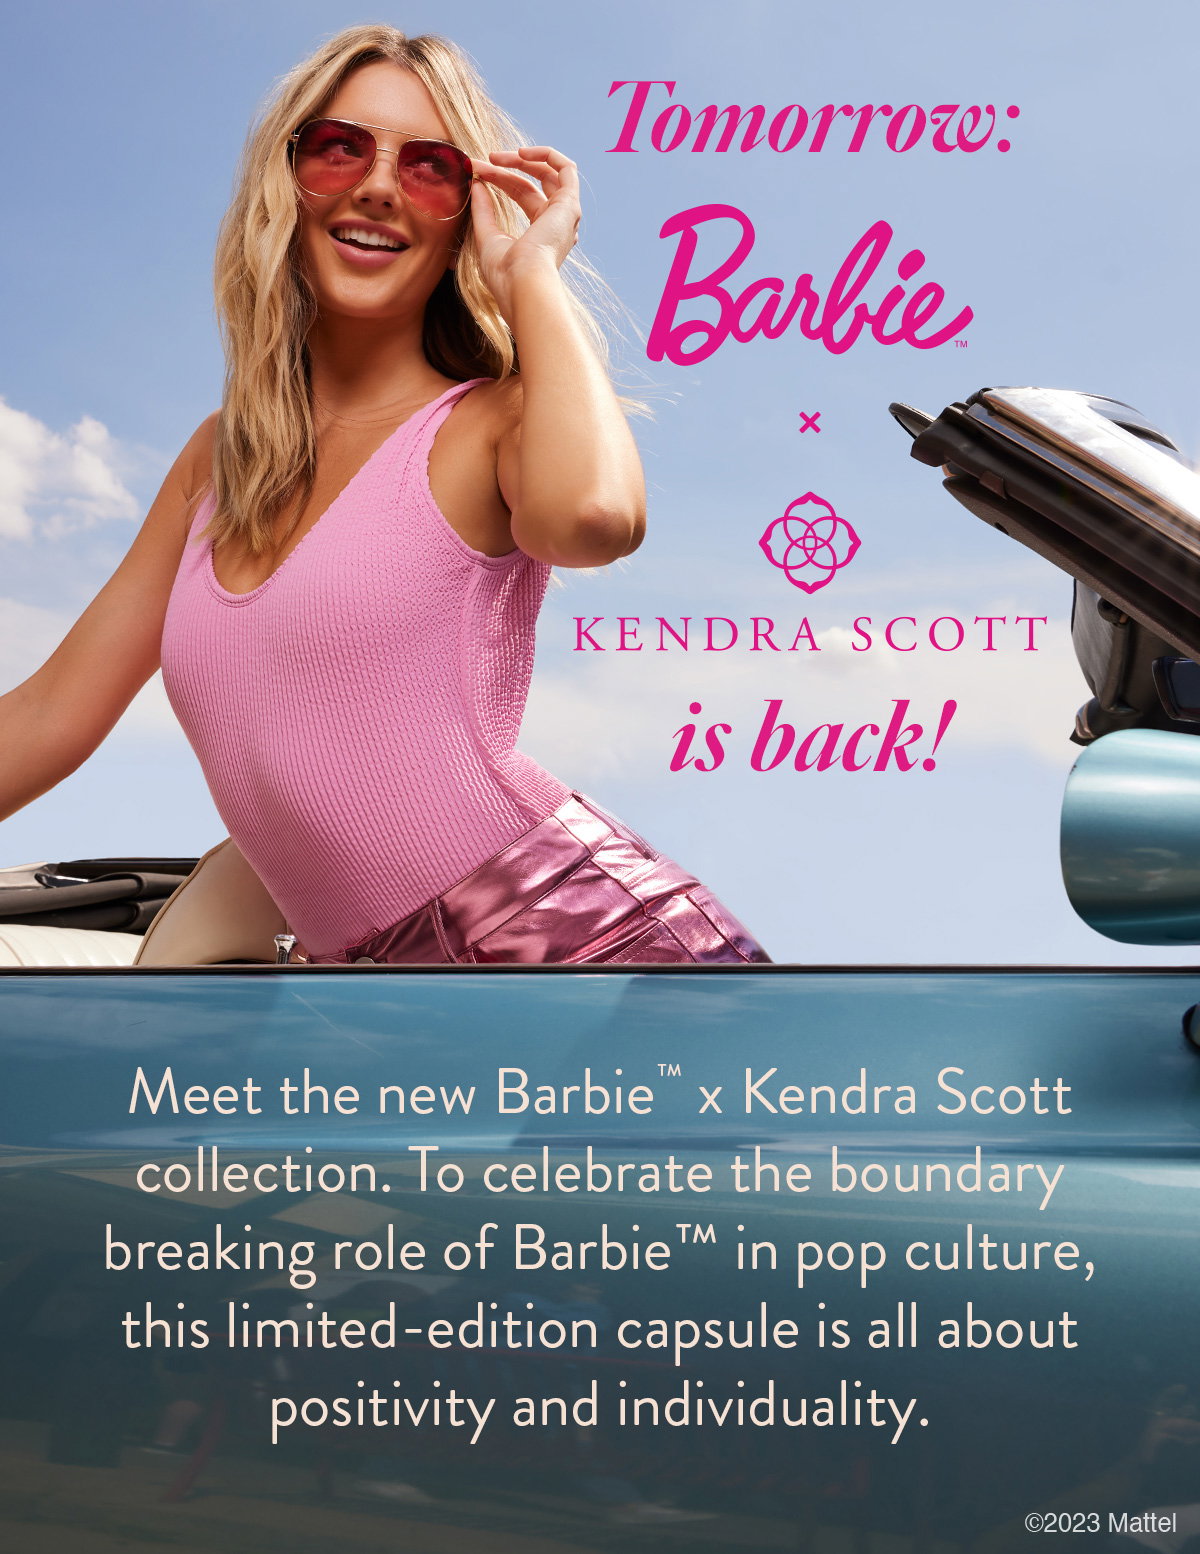 Barbie™ x Kendra Scott Collection, Limited-Edition